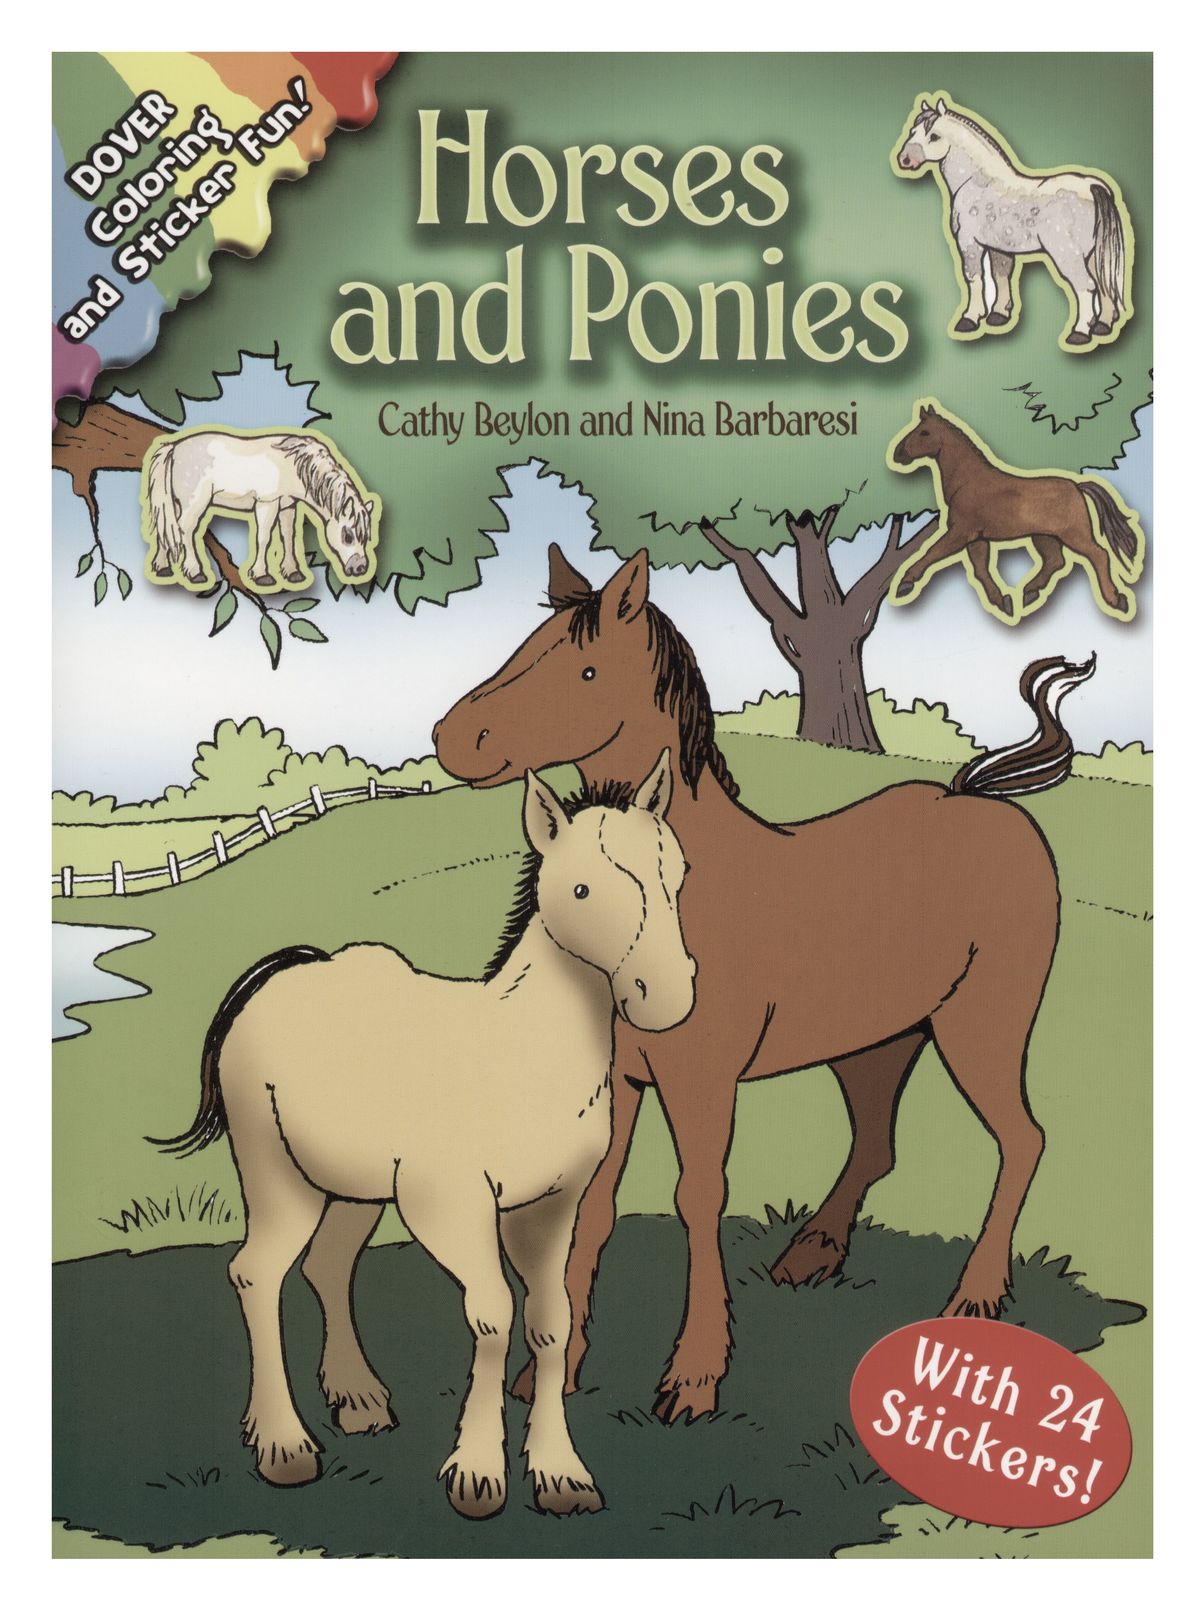 Dover Horses and Ponies: Coloring and Sticker Fun